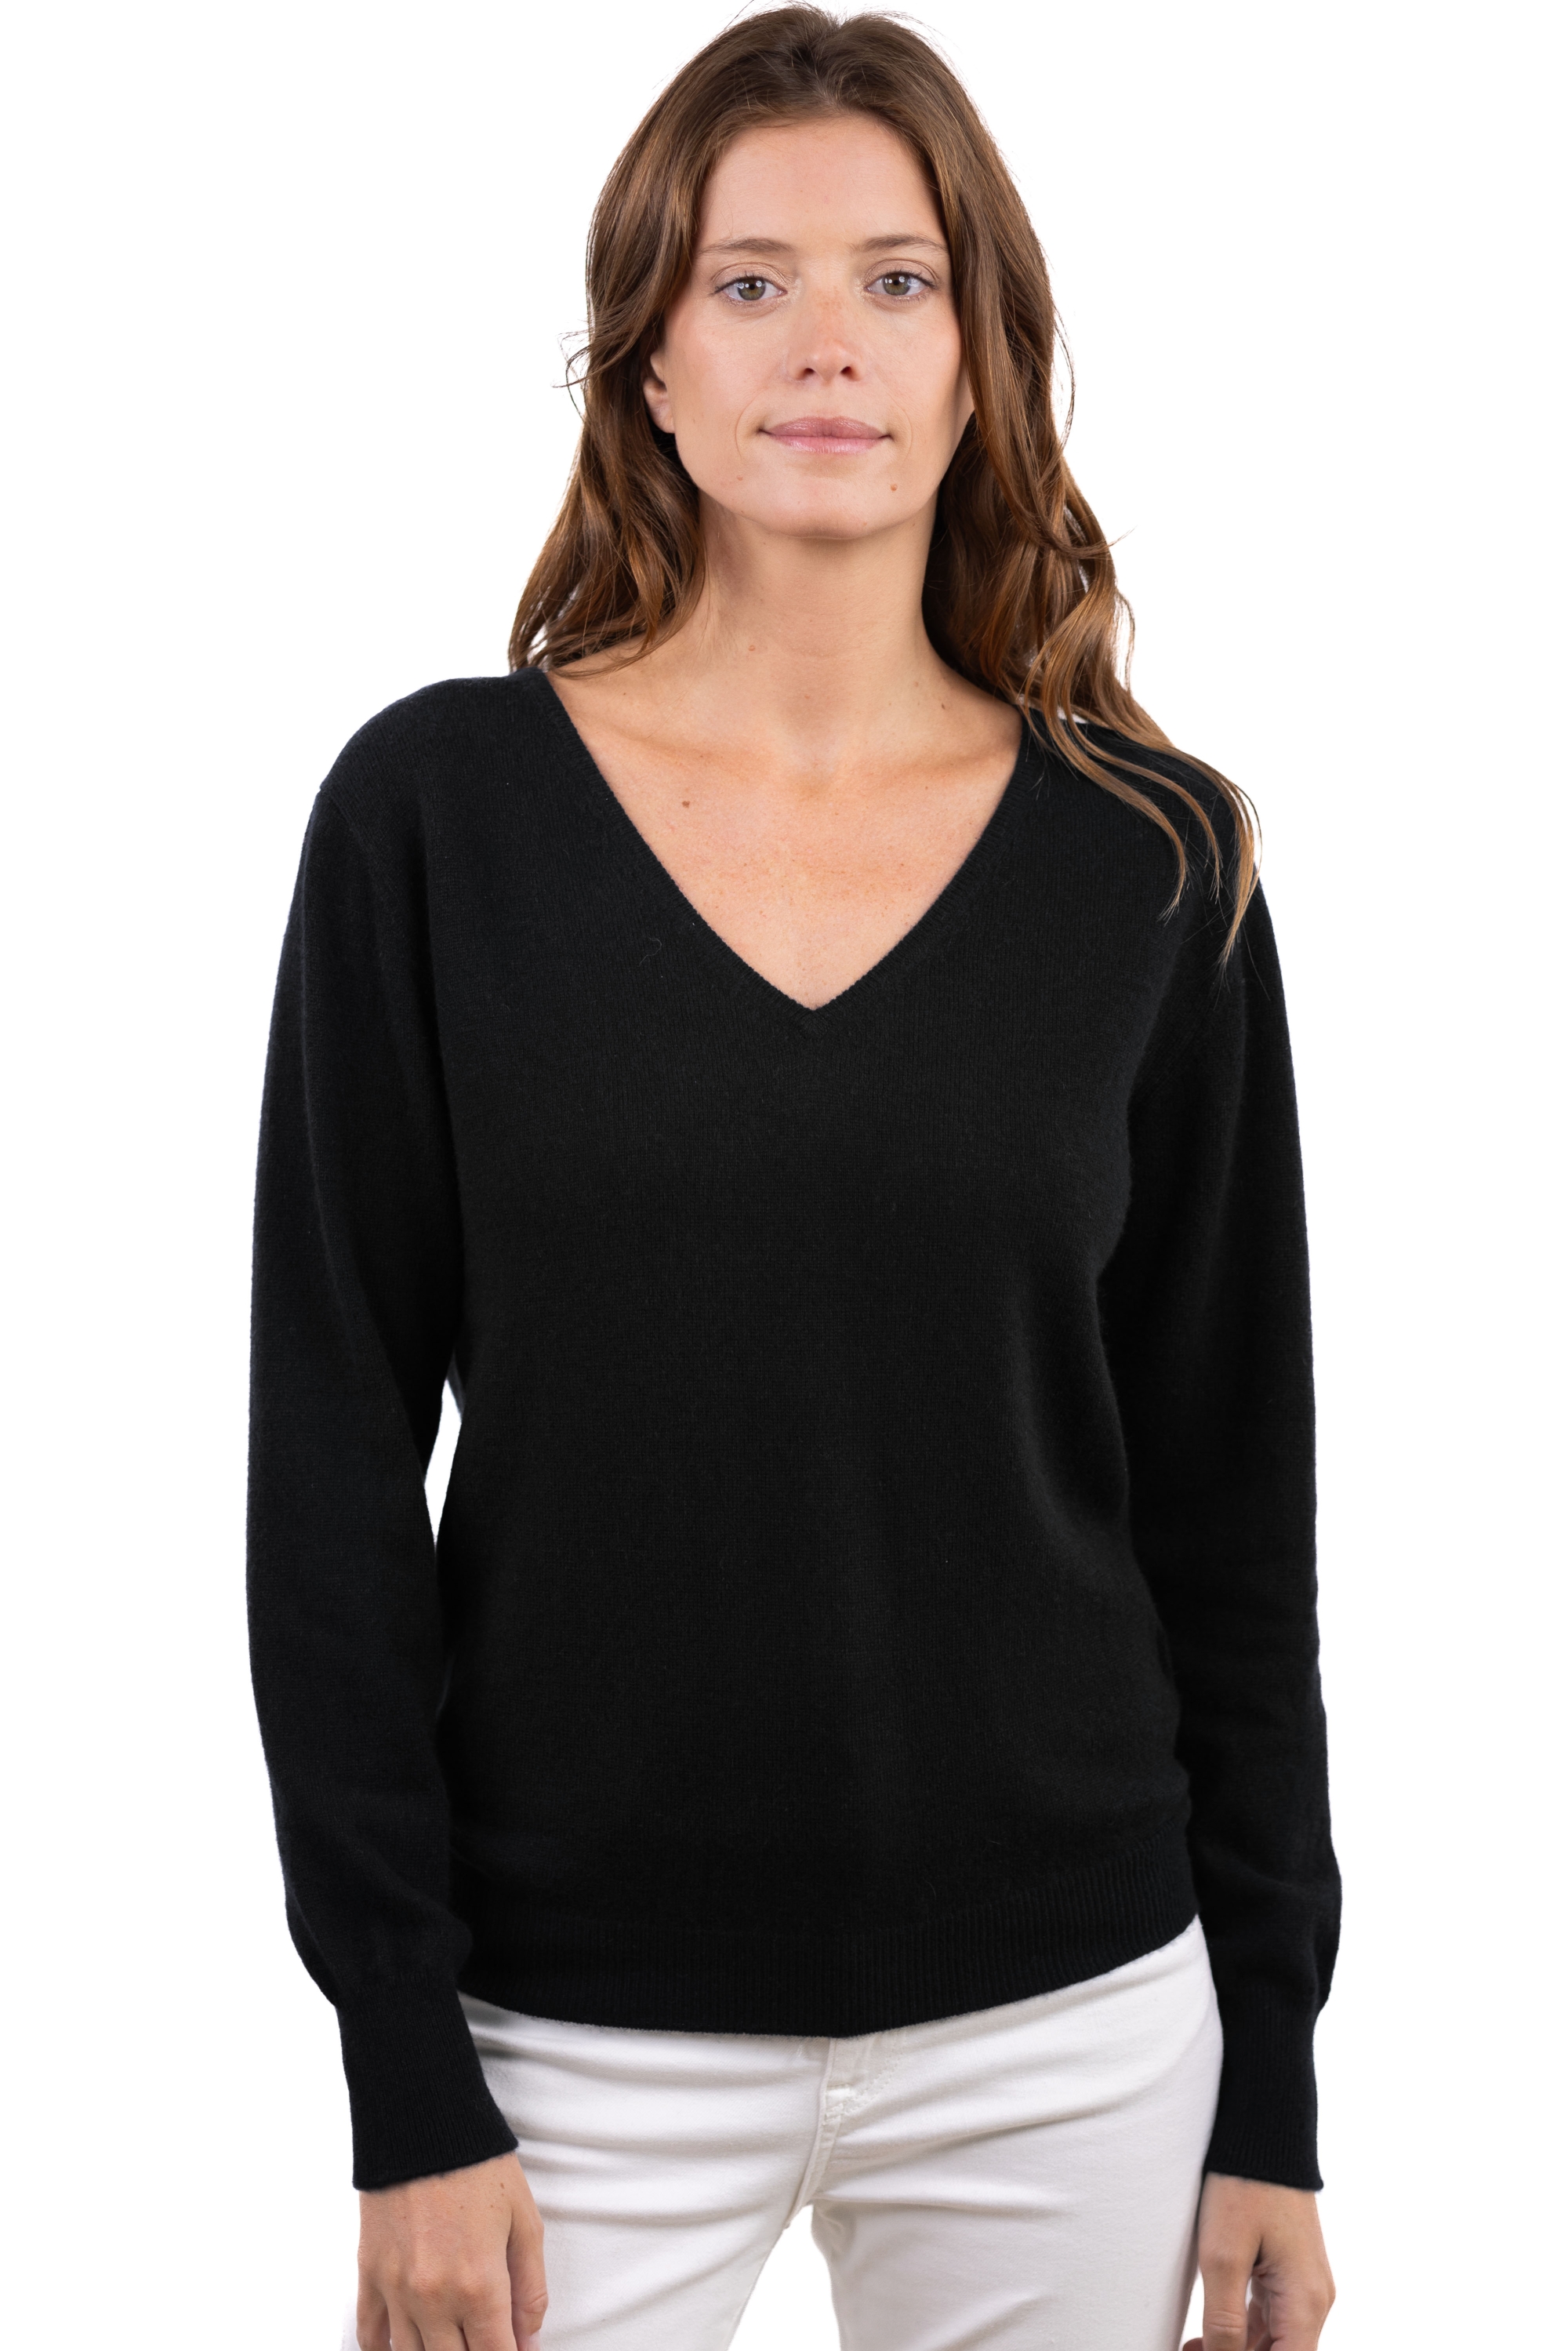 Cashmere ladies basic sweaters at low prices trieste first black xl